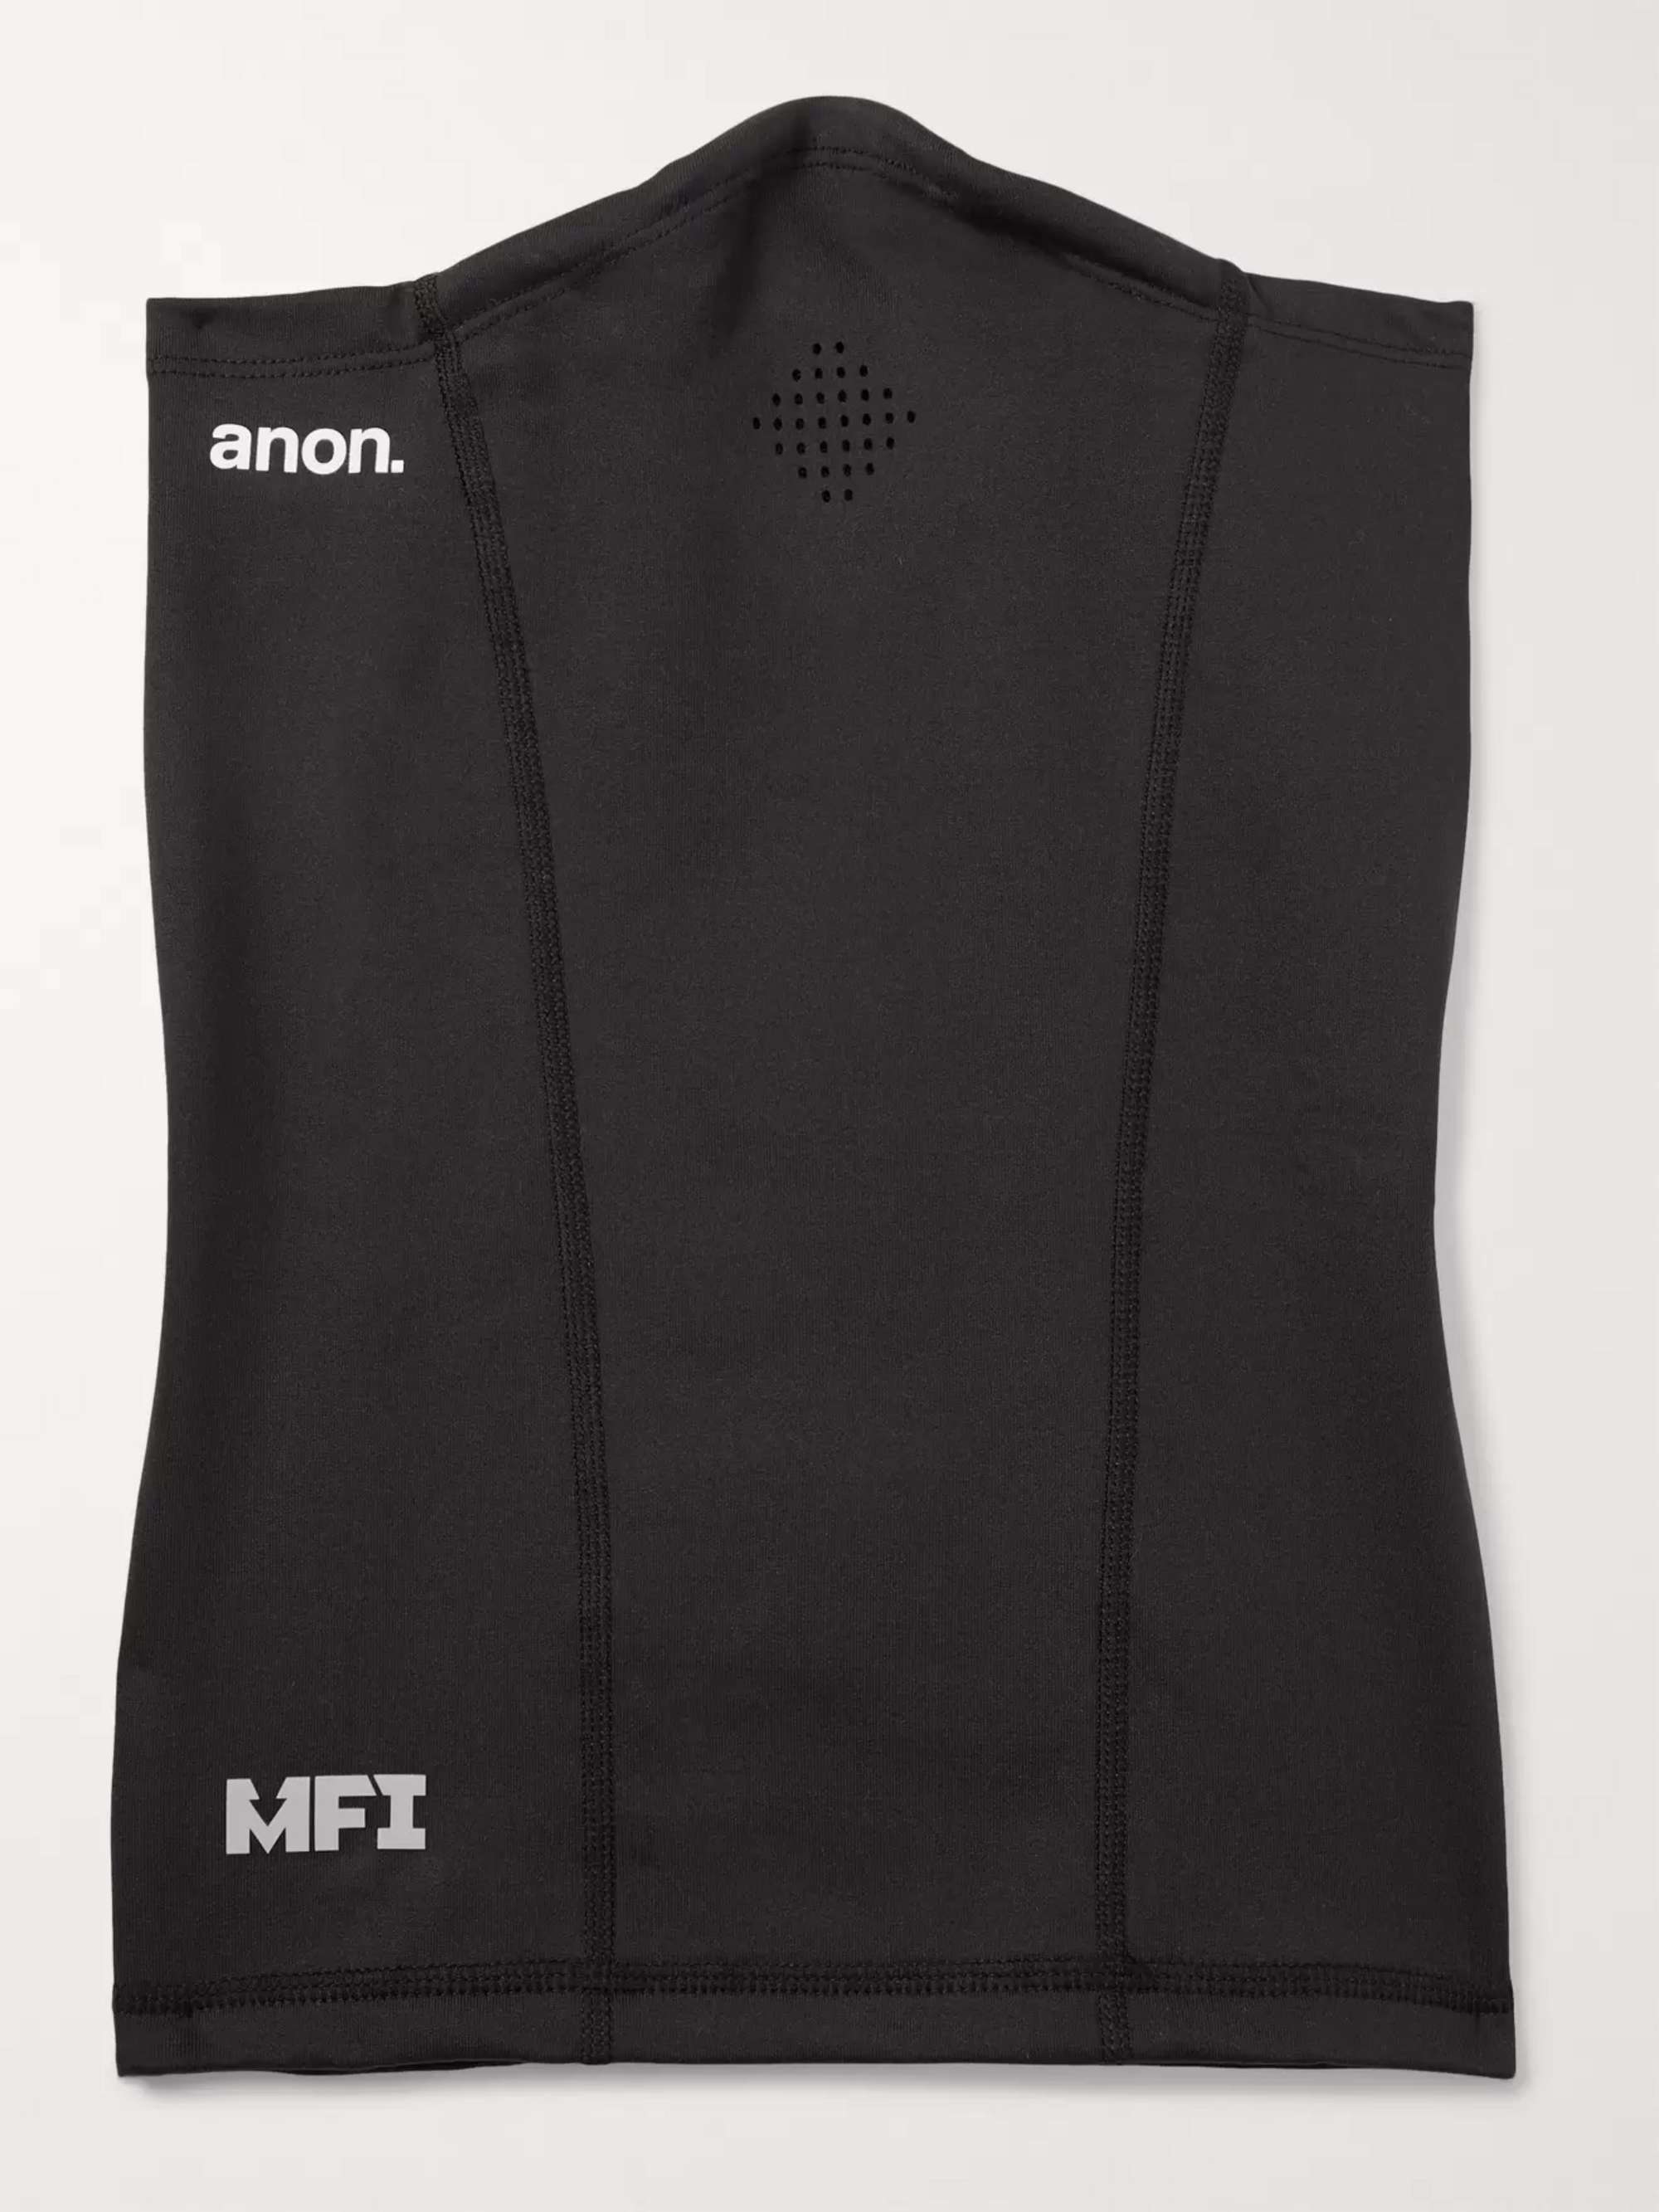 ANON MFI Goggle-Compatible Fleece-Back Stretch-Jersey Neck Warmer